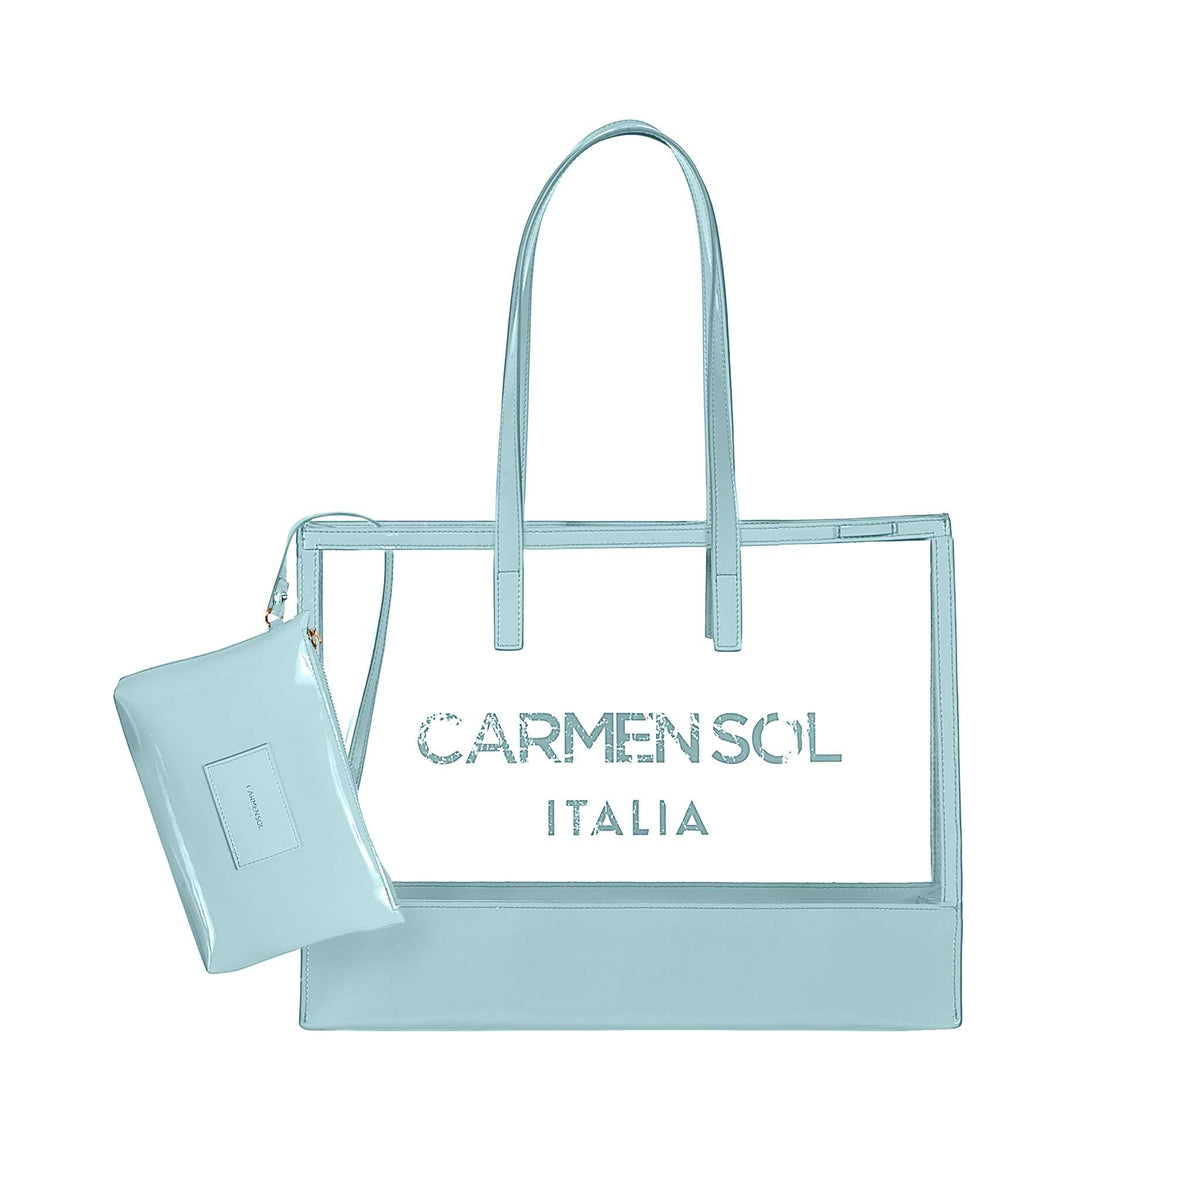 Carmen Sol Taormina clear jelly bags with detachable purse in color baby blue